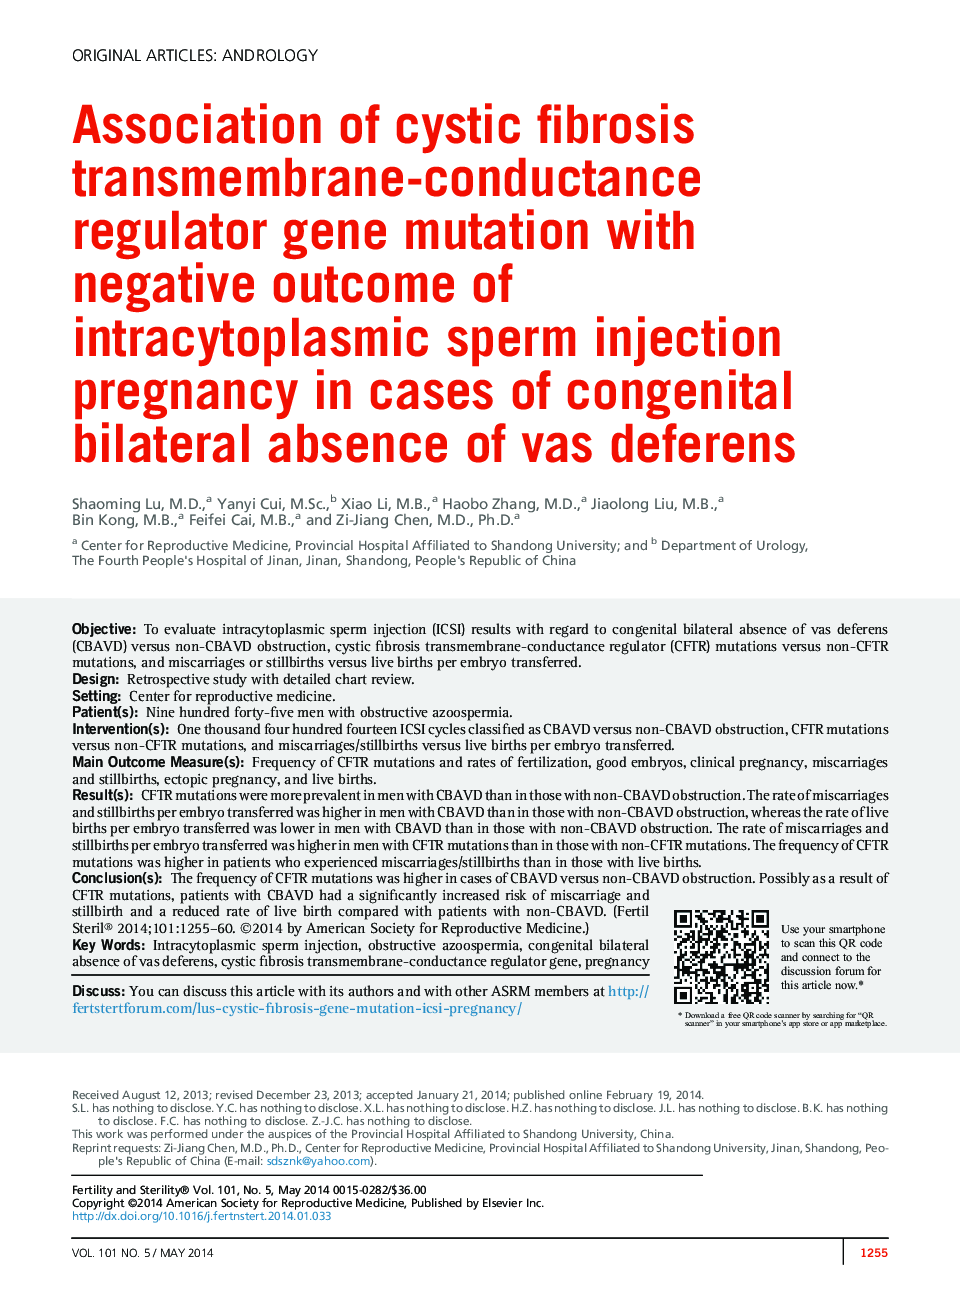 Association of cystic fibrosis transmembrane-conductance regulator gene mutation with negative outcome of intracytoplasmic sperm injection pregnancy in cases of congenital bilateral absence of vas deferens